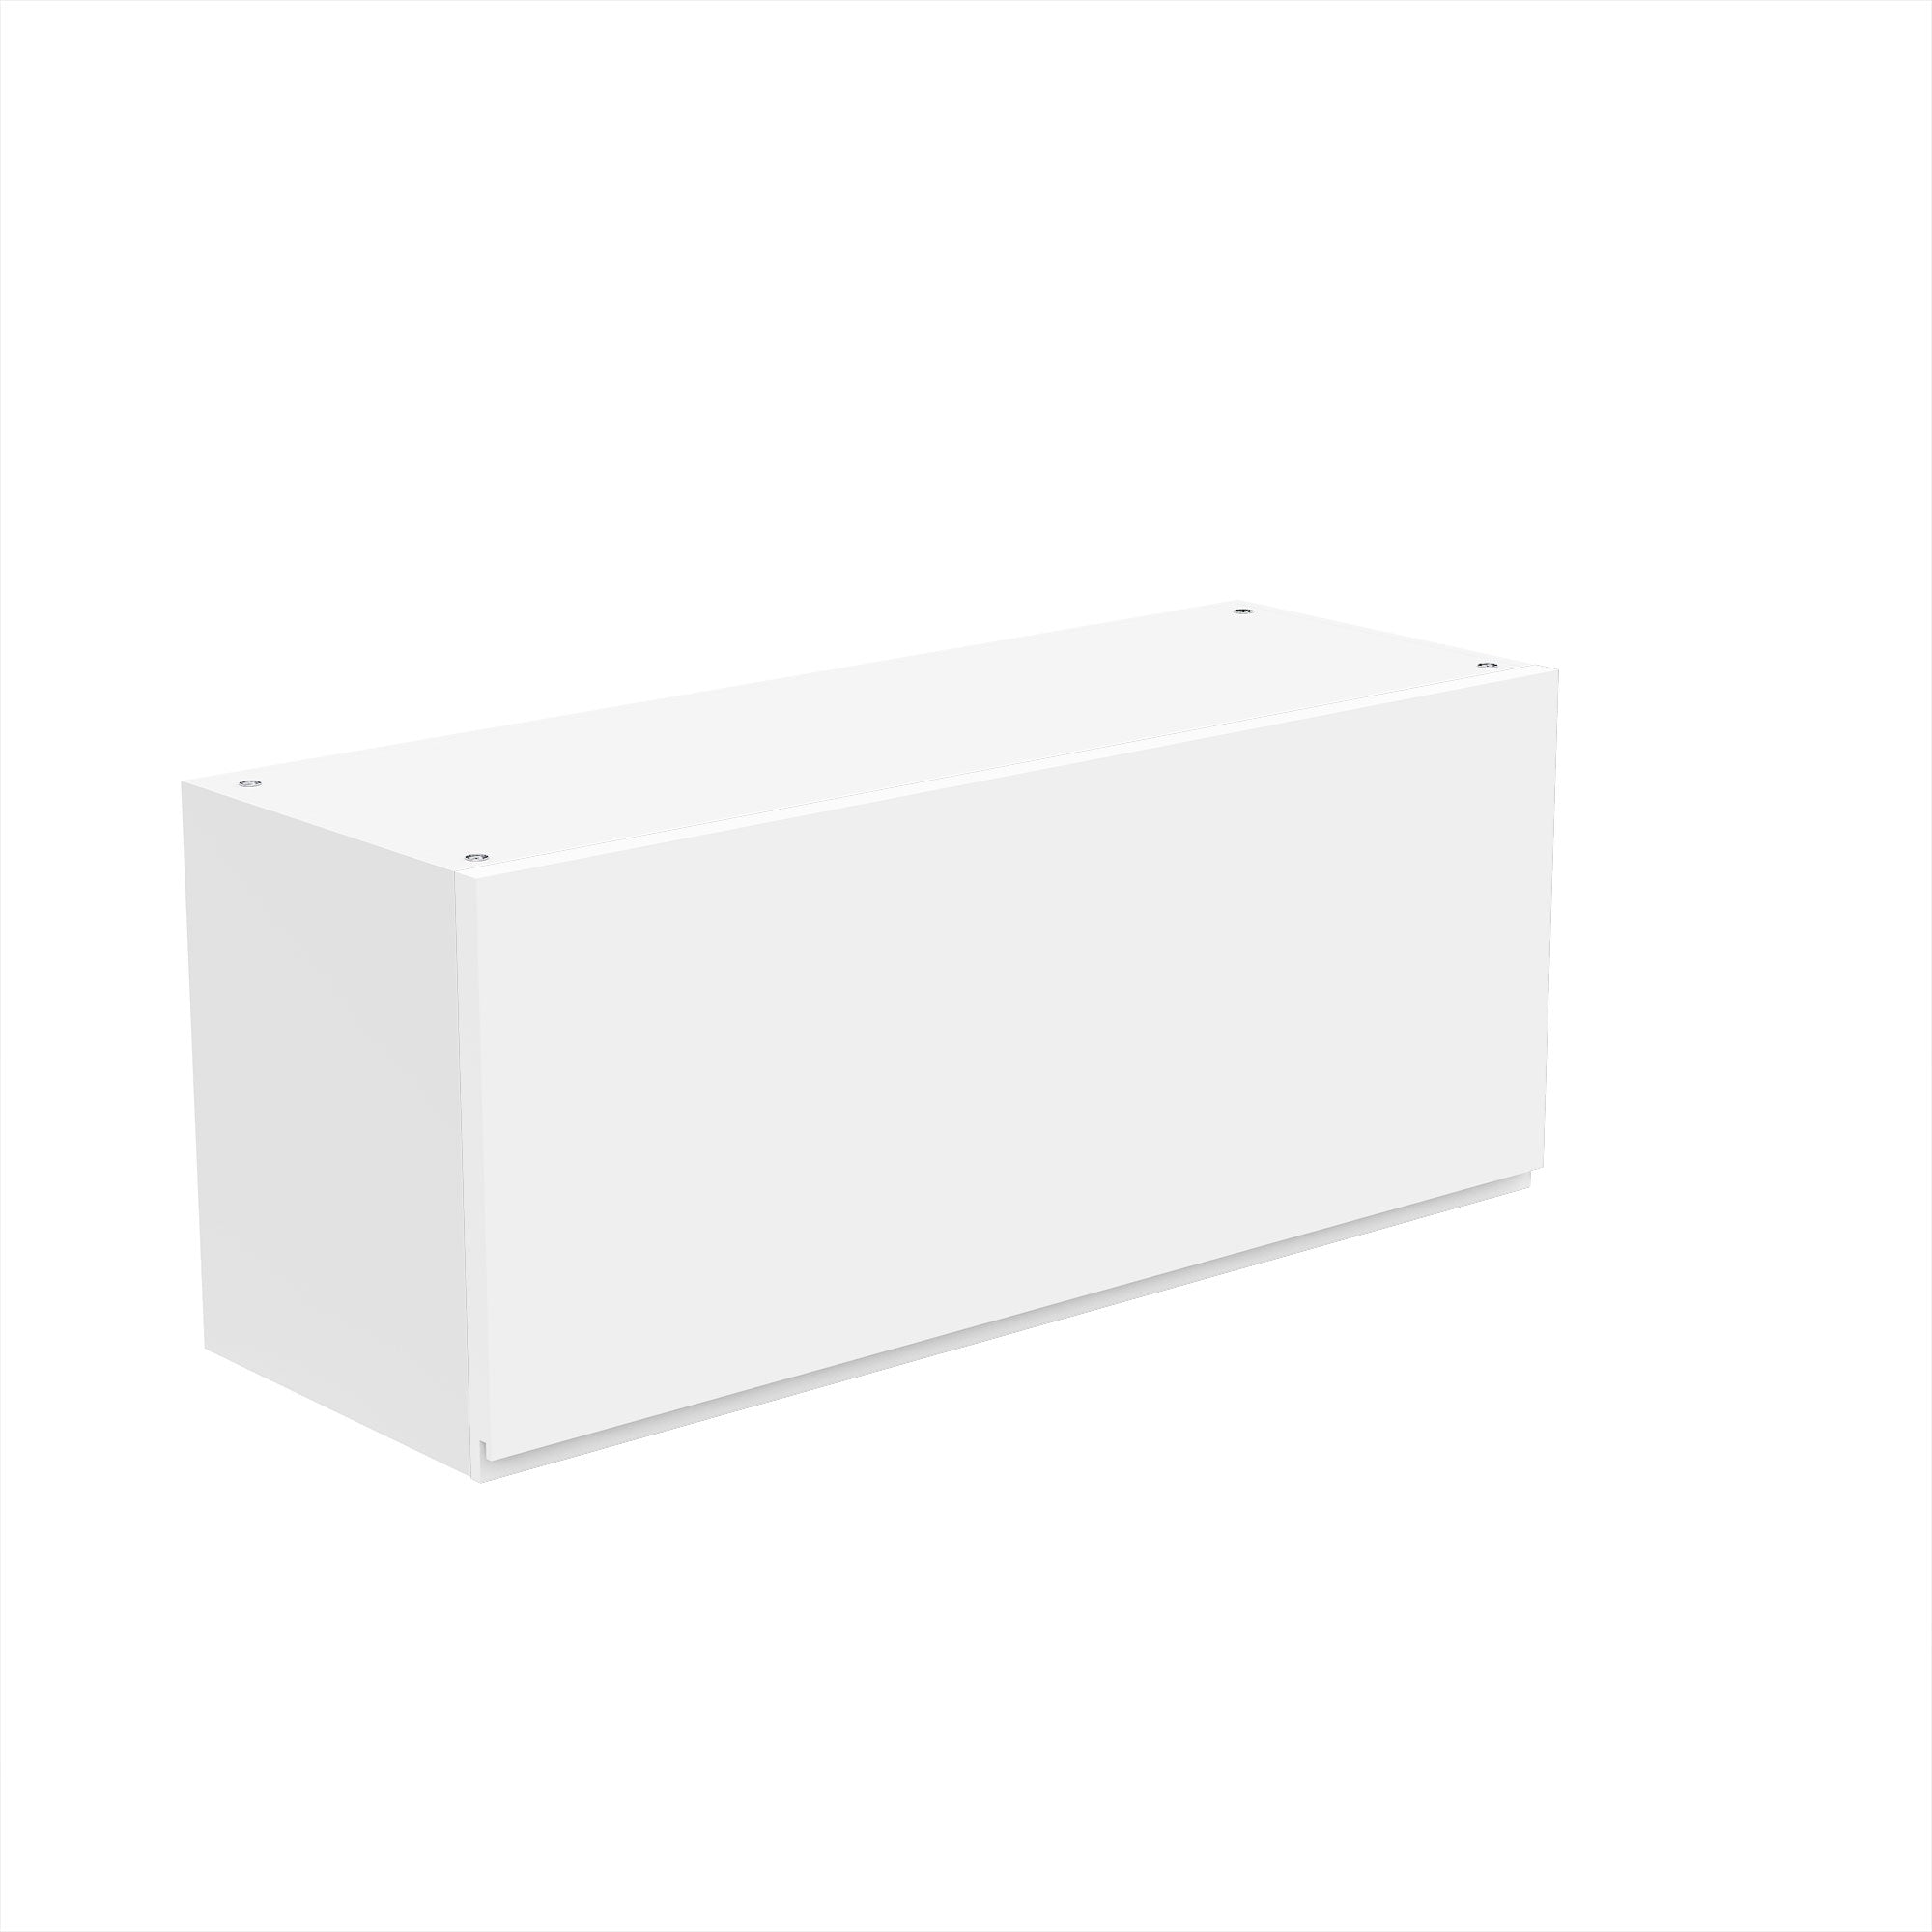 Wall Cabinet - RTA - Lacquer White - Horizontal Door Cabinet | 36"W x 15"H x 12"D